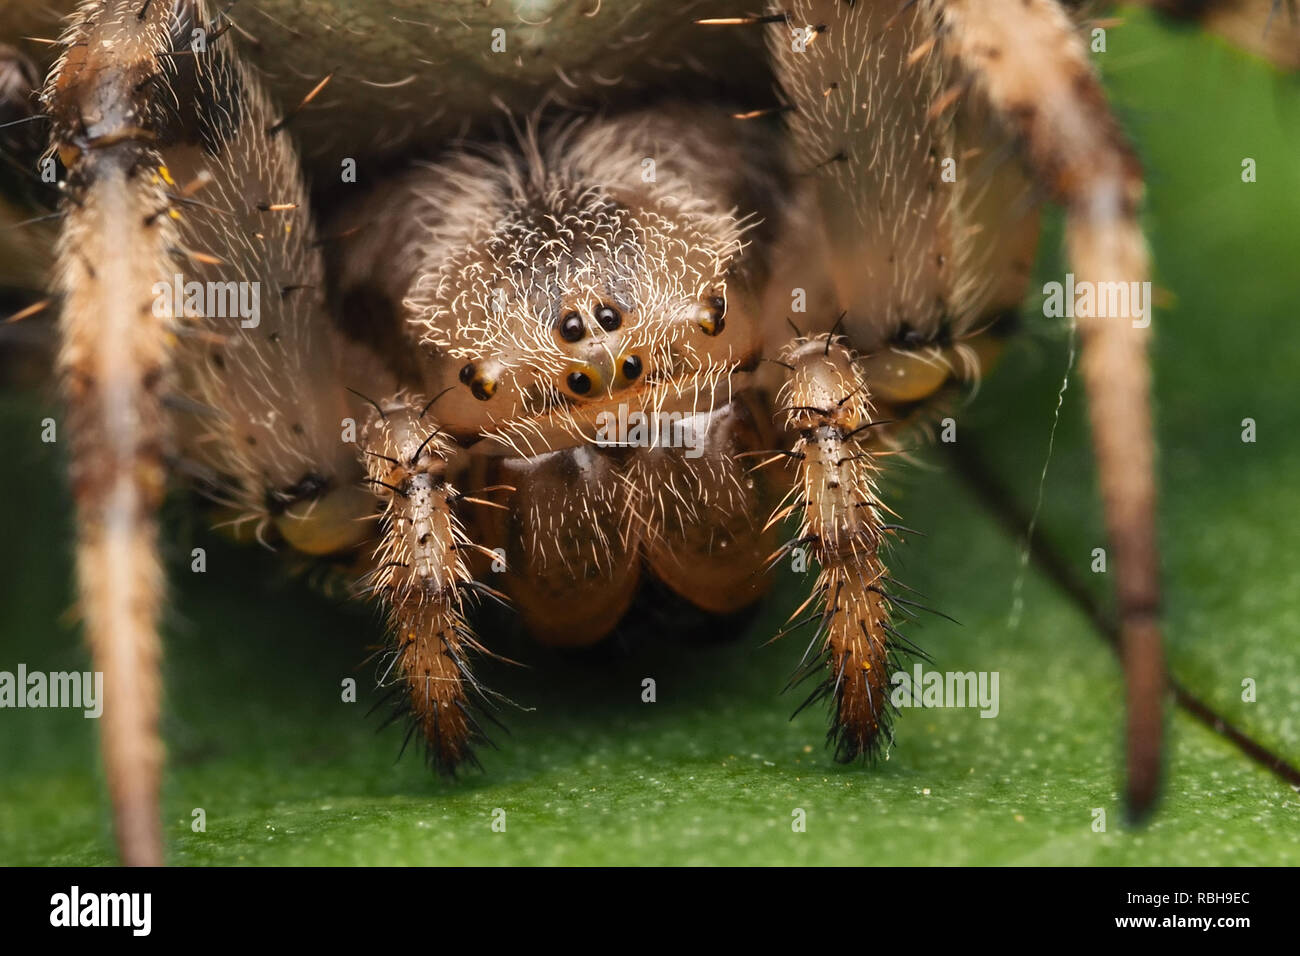 Close up of the face of a Four-spotted Orb Weaver spider (Araneus quadratus) resting on a leaf. Tipperary, Ireland Stock Photo